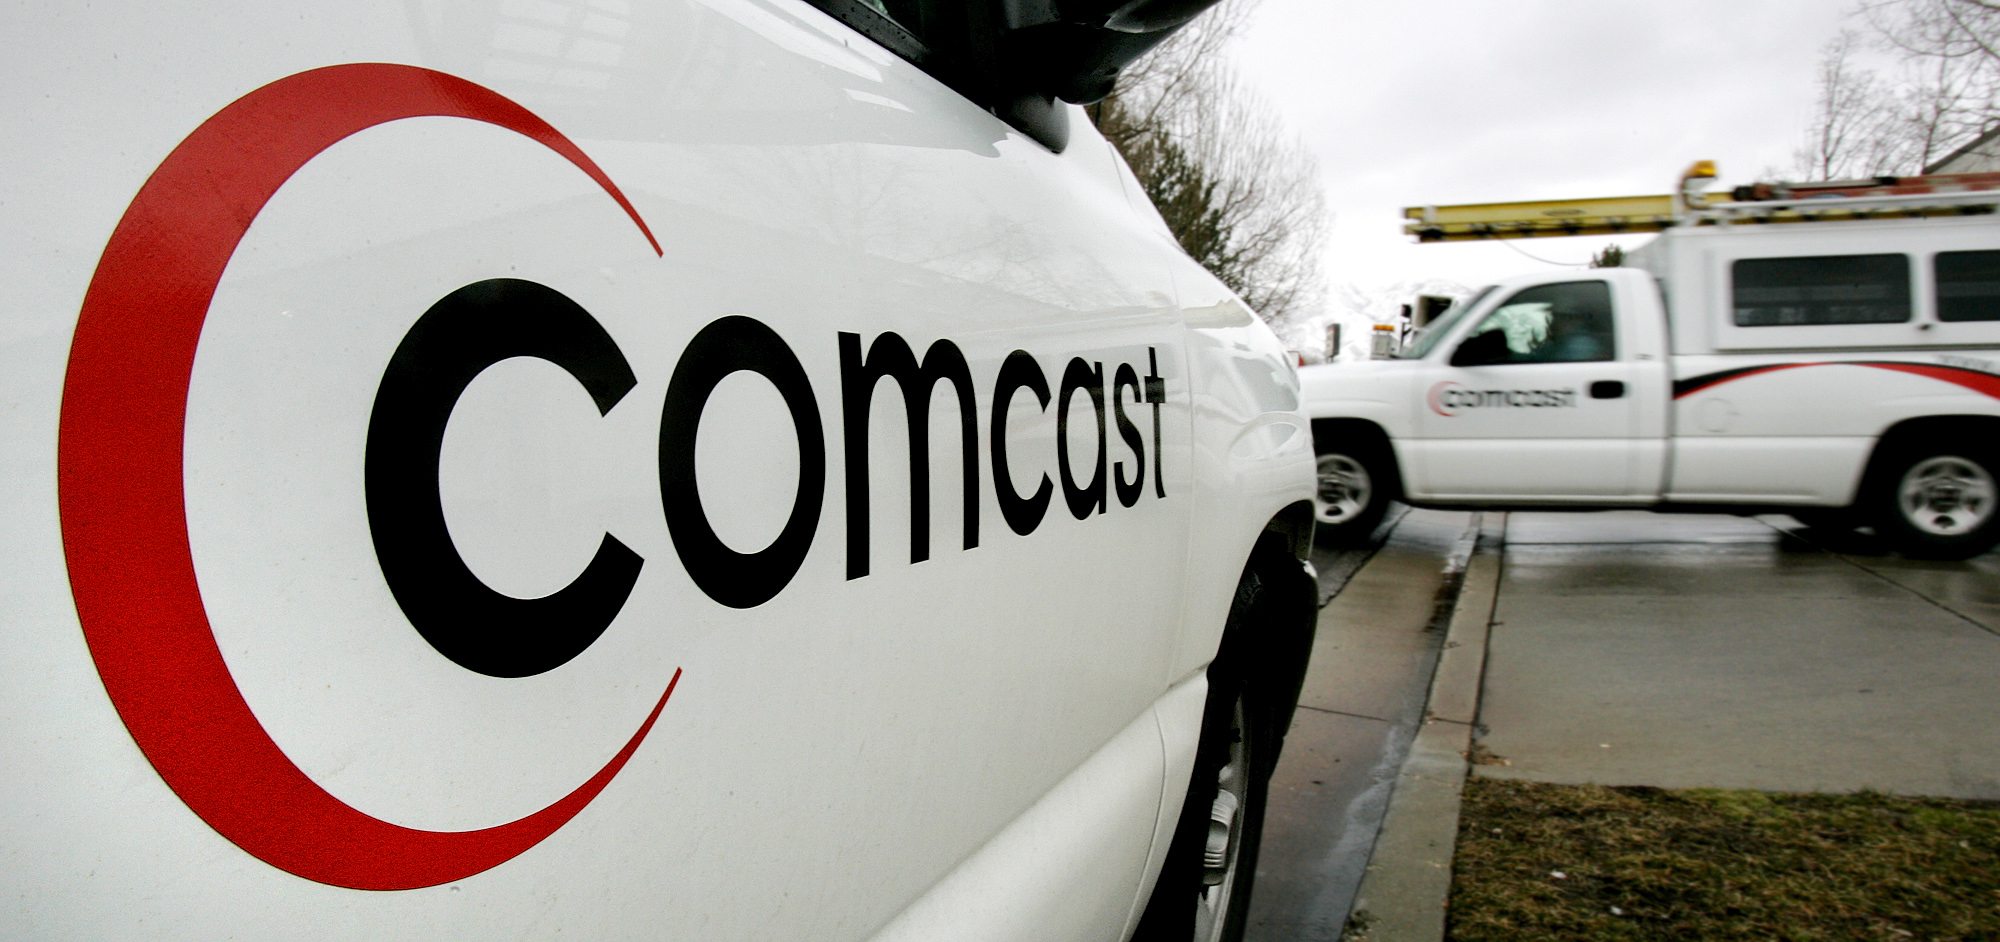 Negotiations on a new franchise agreement between Comcast and the City/County Cable Commission have slowed, but the commission's chief negotiator says discussions remain on track with no major disagreements between the two sides.